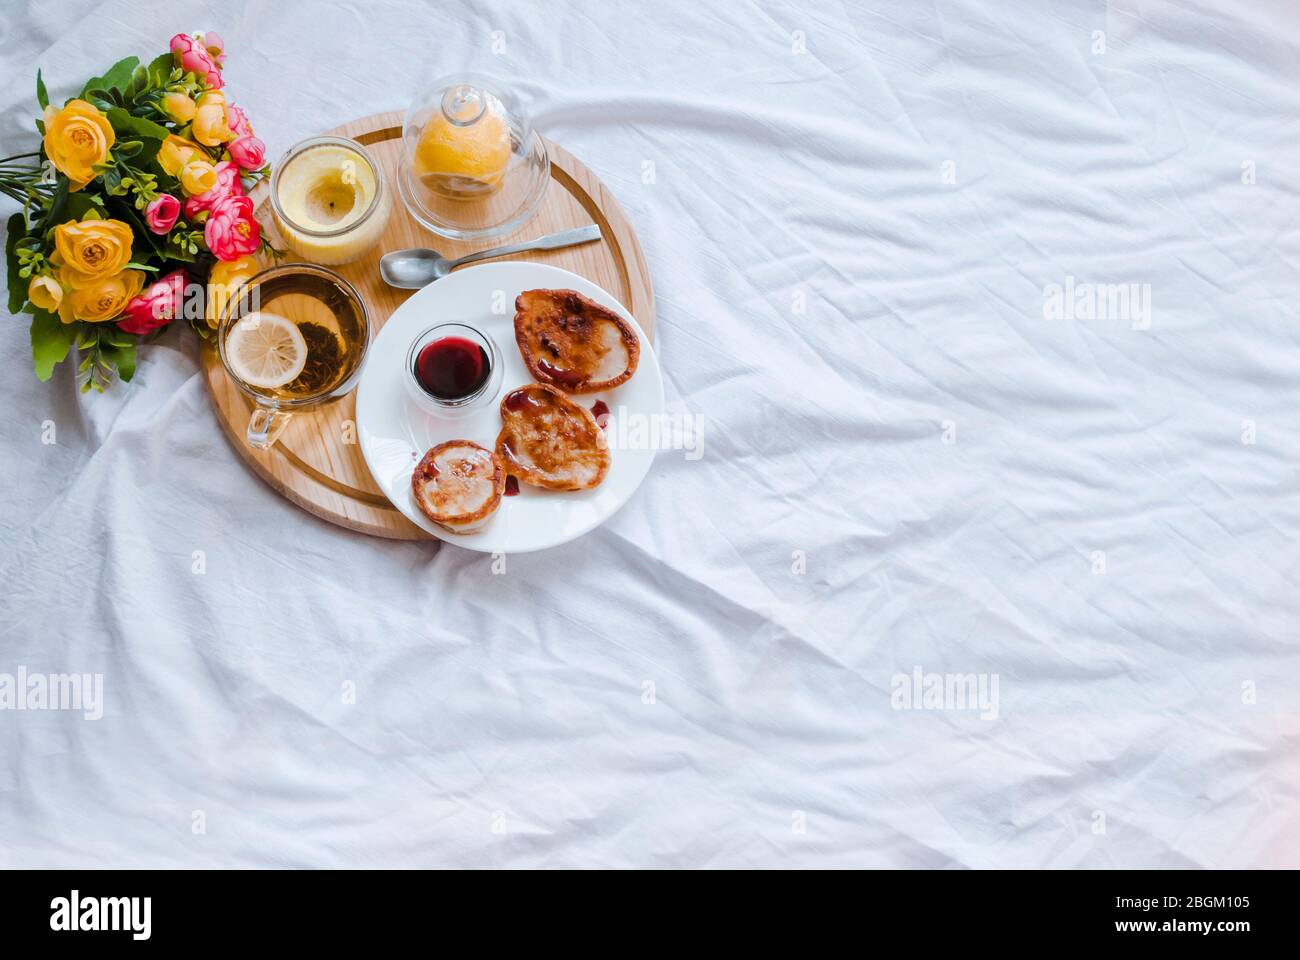 Breakfast in bed. Homeliness. Lemon tea close-up. Place for text Stock Photo